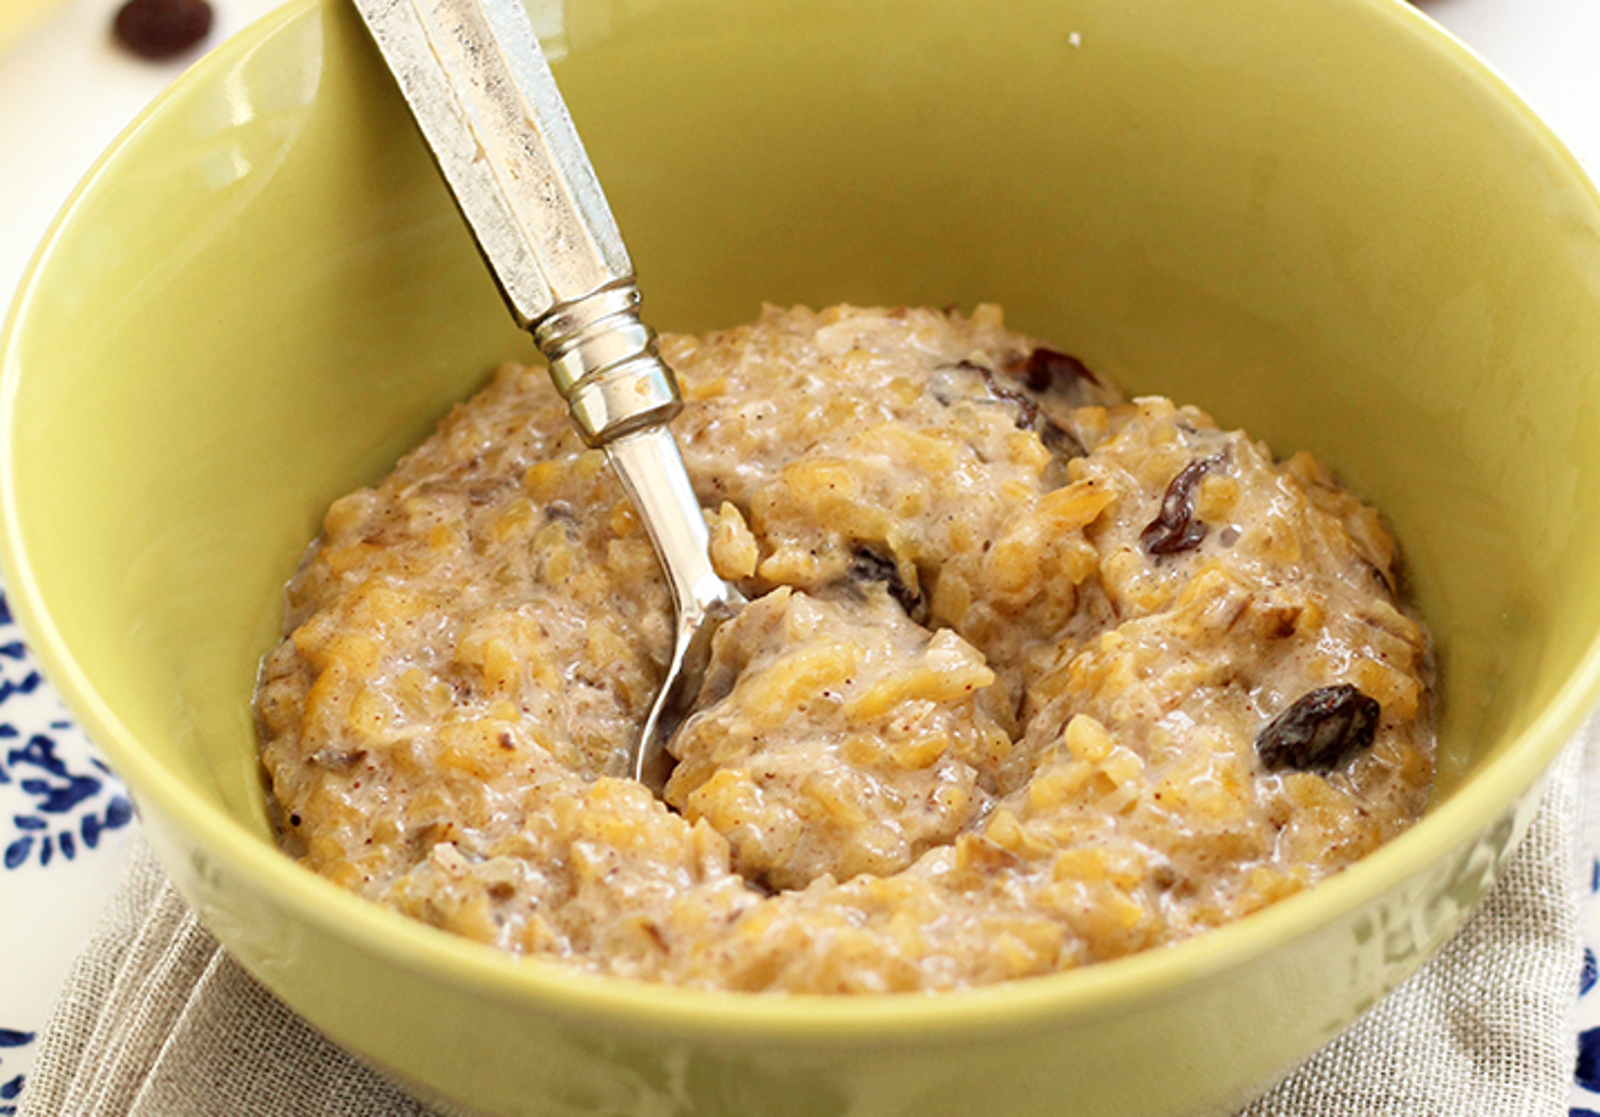 15 Things to Do With Overripe Bananas